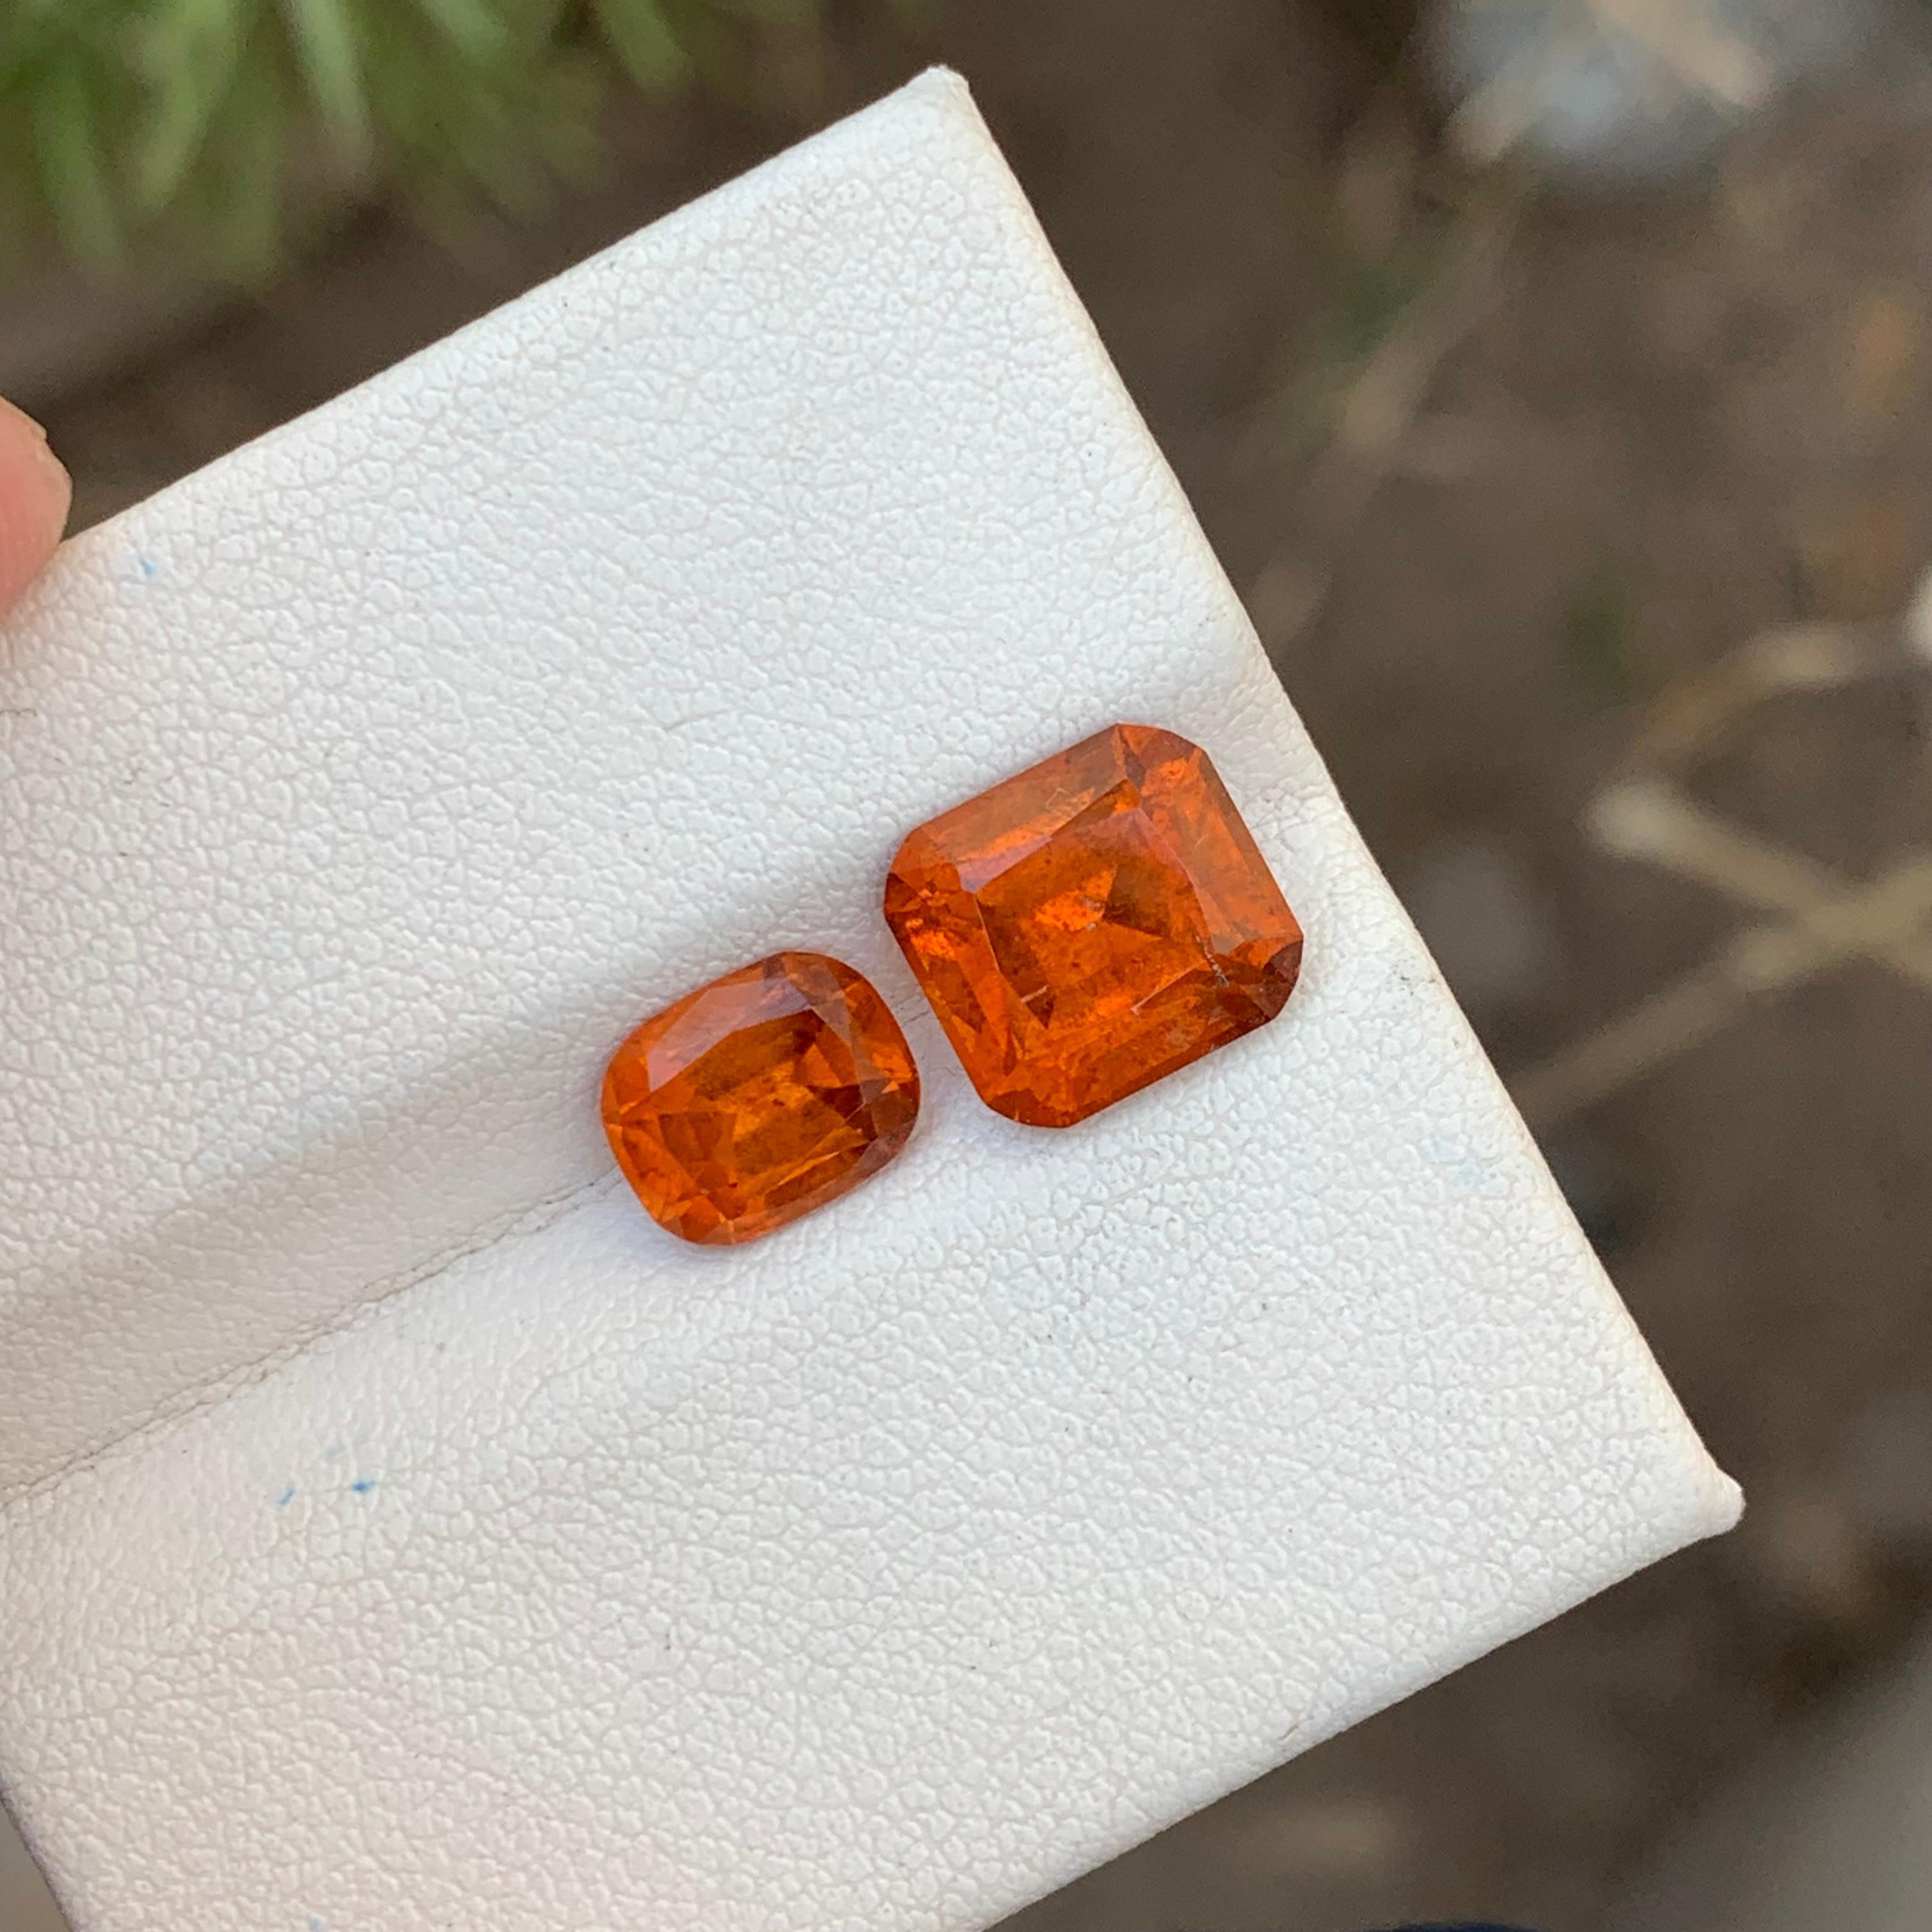 5.95 Carats Natural Loose Hessonite Garnet 2 Pieces For Ring Jewelry Making  For Sale 3